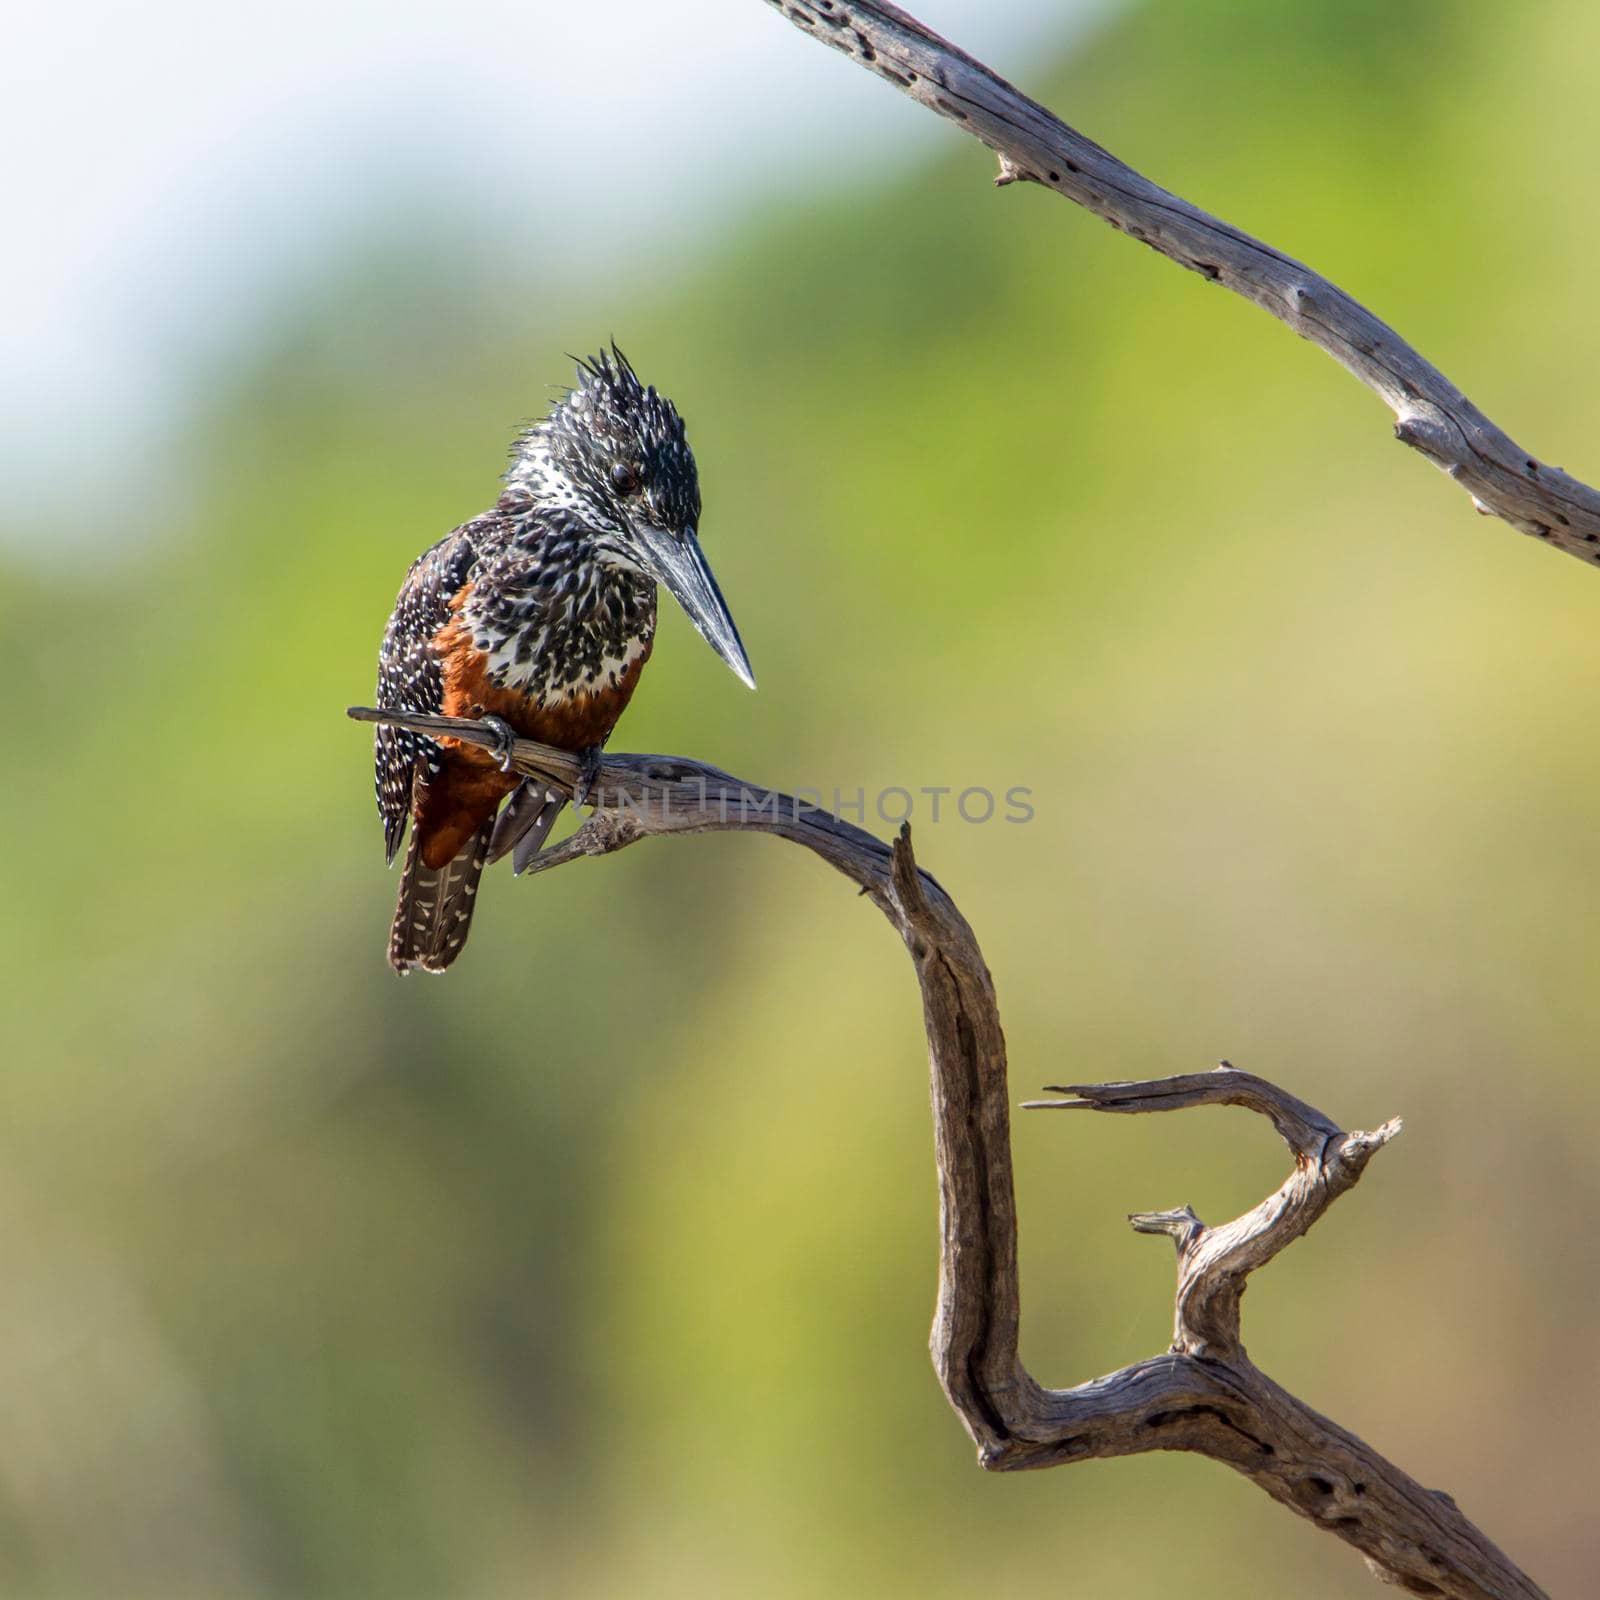 African Giant kingfisher in Kruger National park, South Africa by PACOCOMO